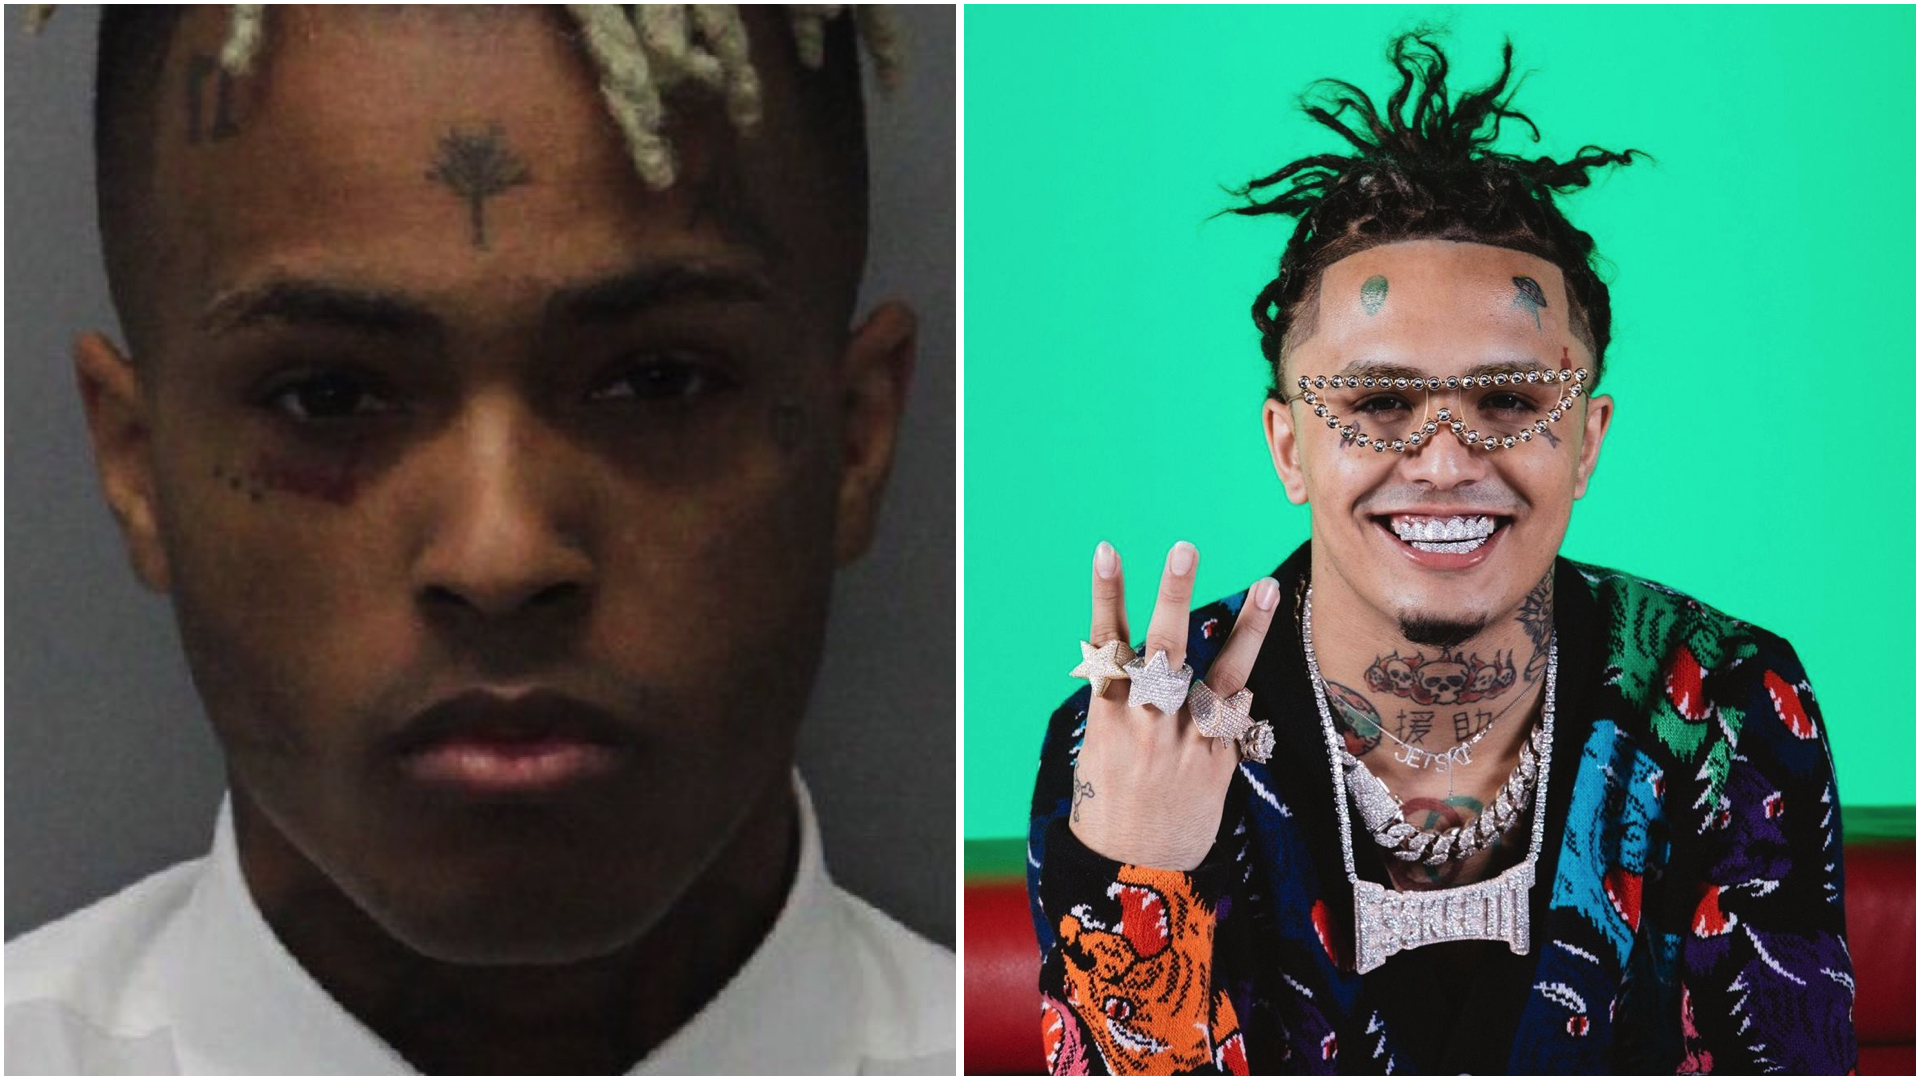 Xxxtentacion Appears On New Song With Lil Pump Amid Controversy Surrounding Late Rapper Music